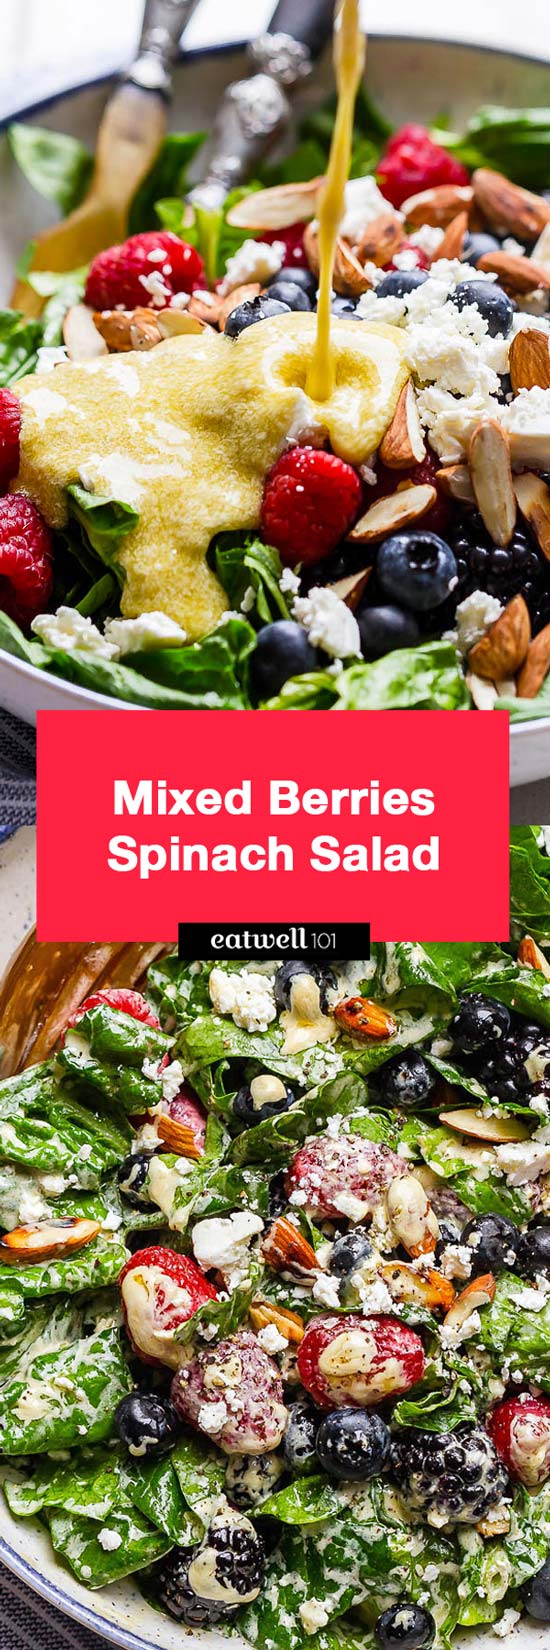 Mixed Berries Spinach Salad Recipe - A fresh Berry Feta spinach salad that’s simple, healthy and SO delicious!